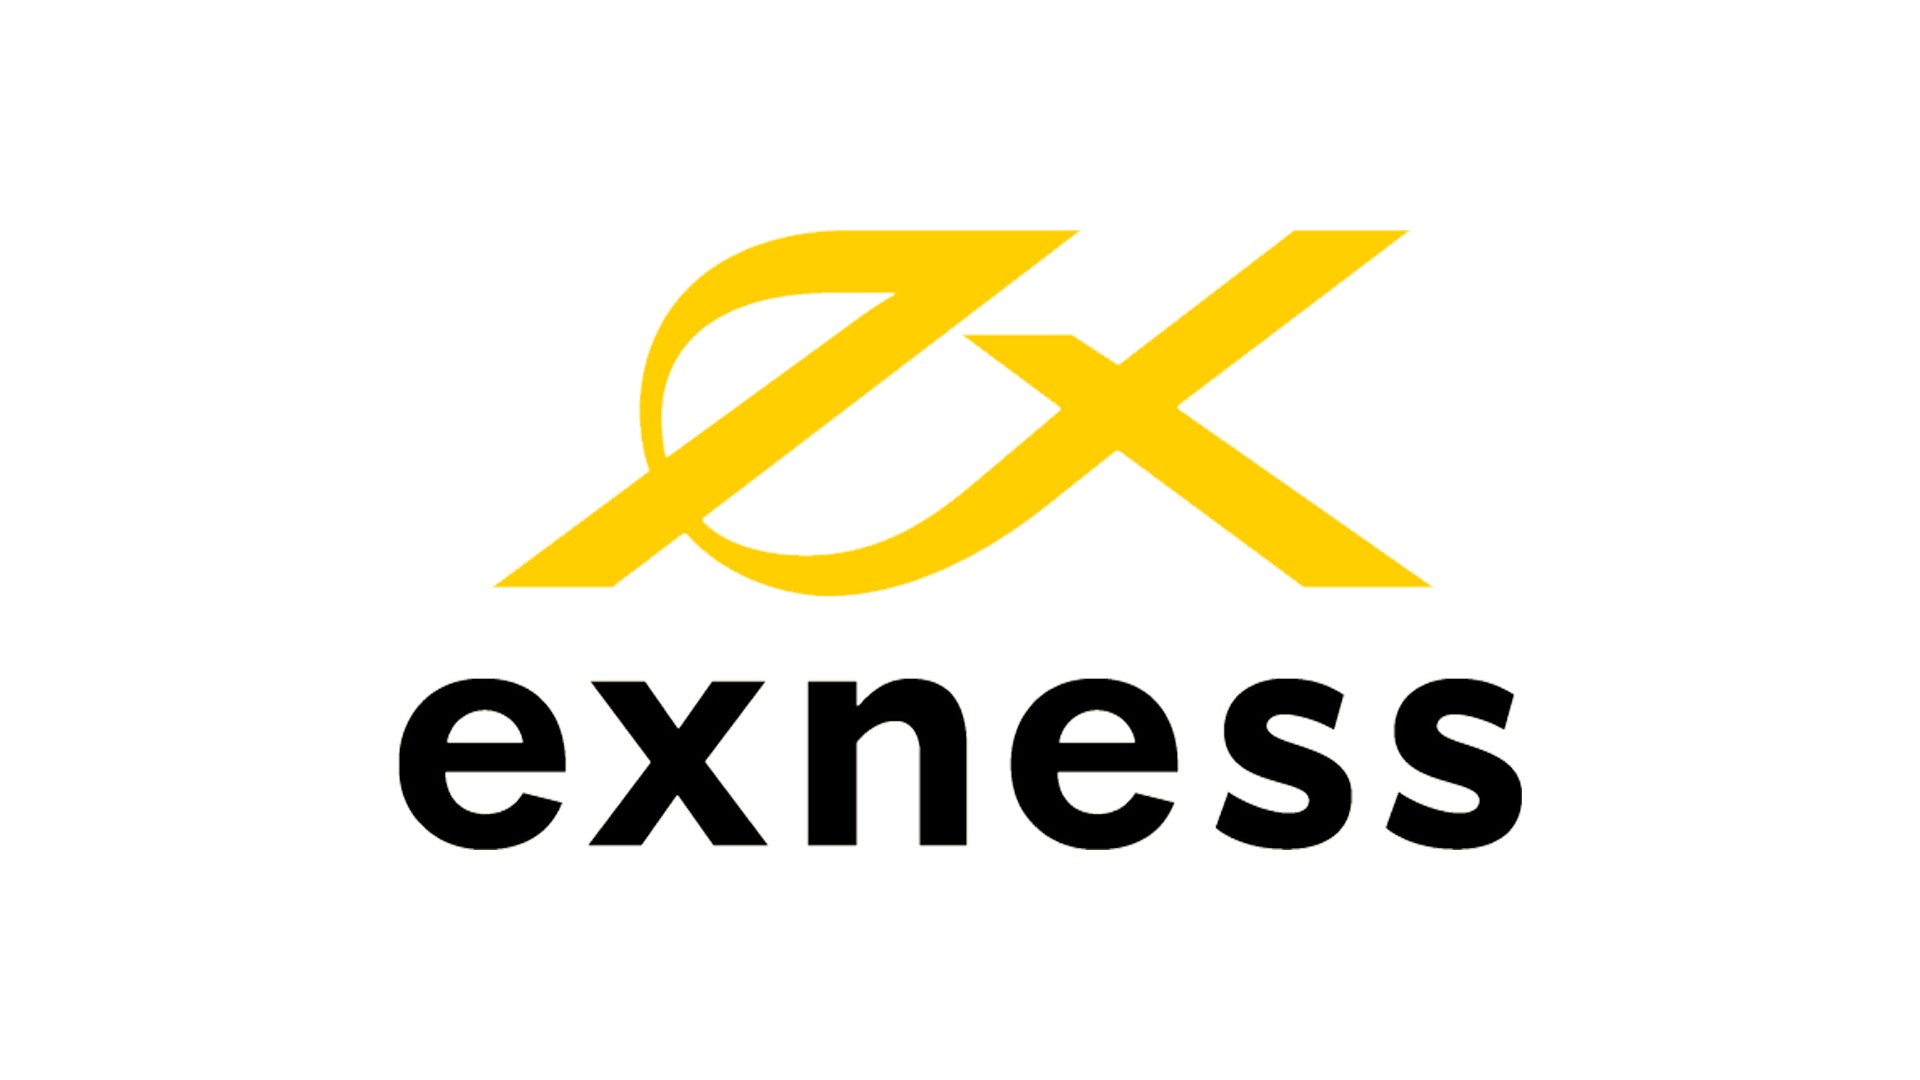 Exness achieves record-breaking July trading volume of $3.9 trillion